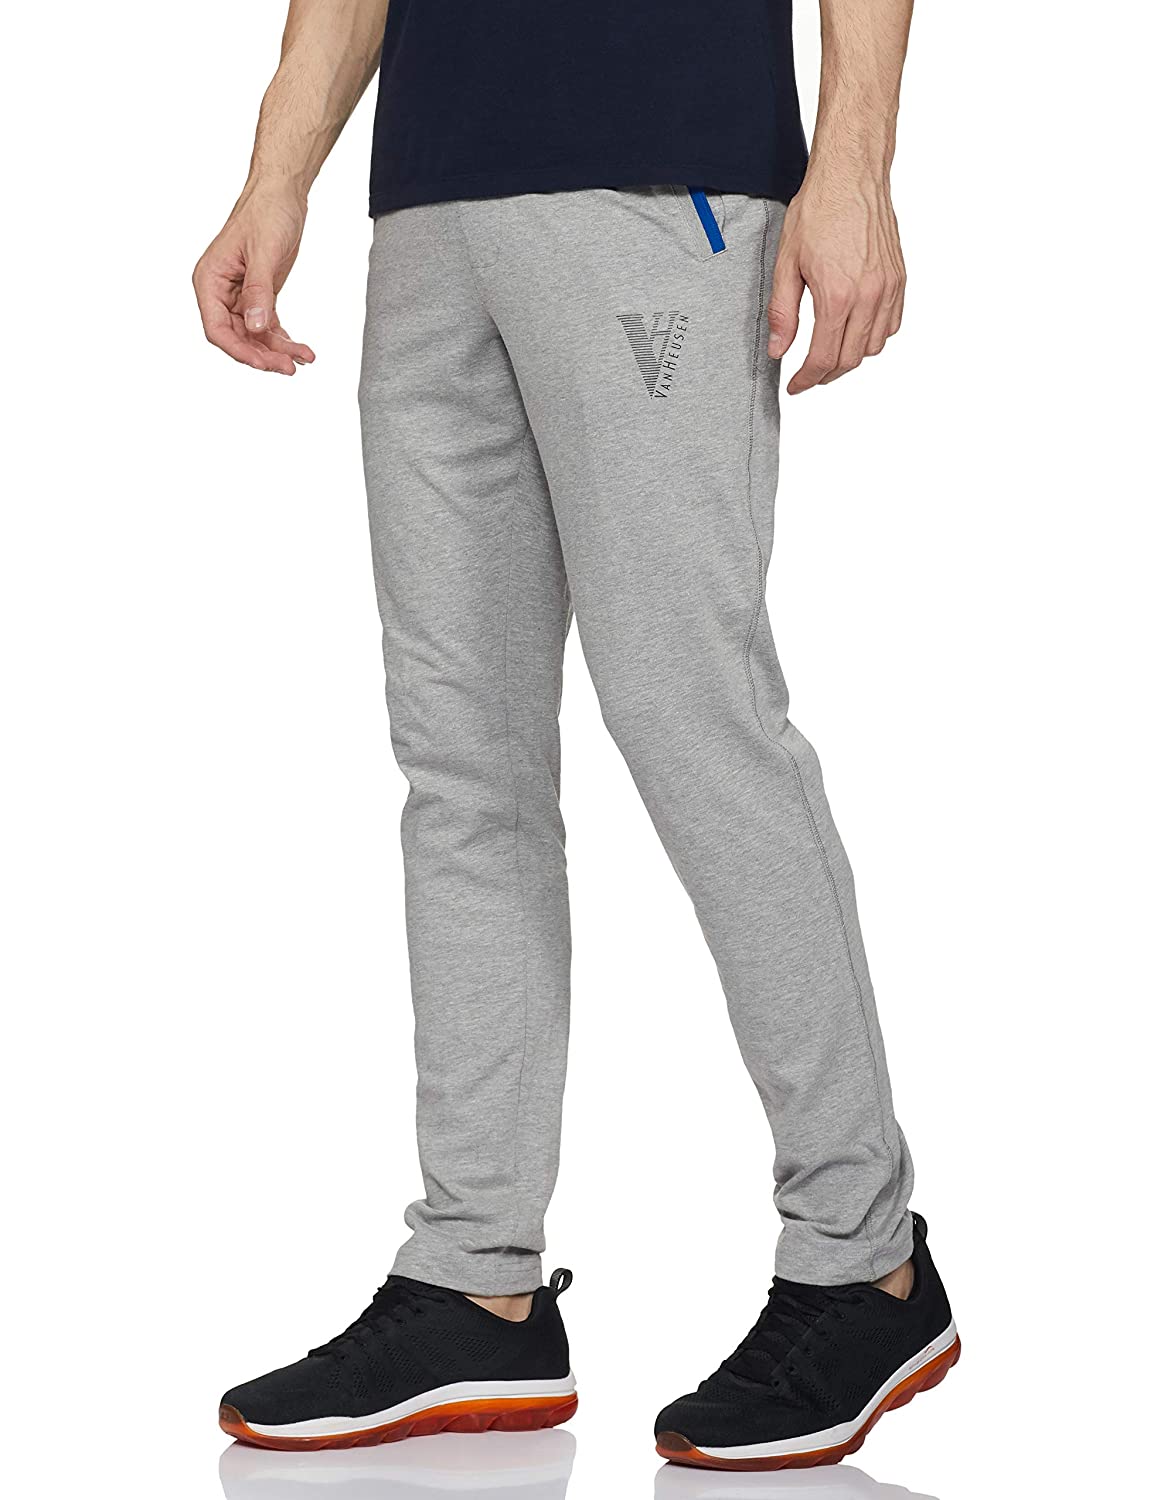 Grey Textured Track Pants - Buy Grey Textured Track Pants online in India